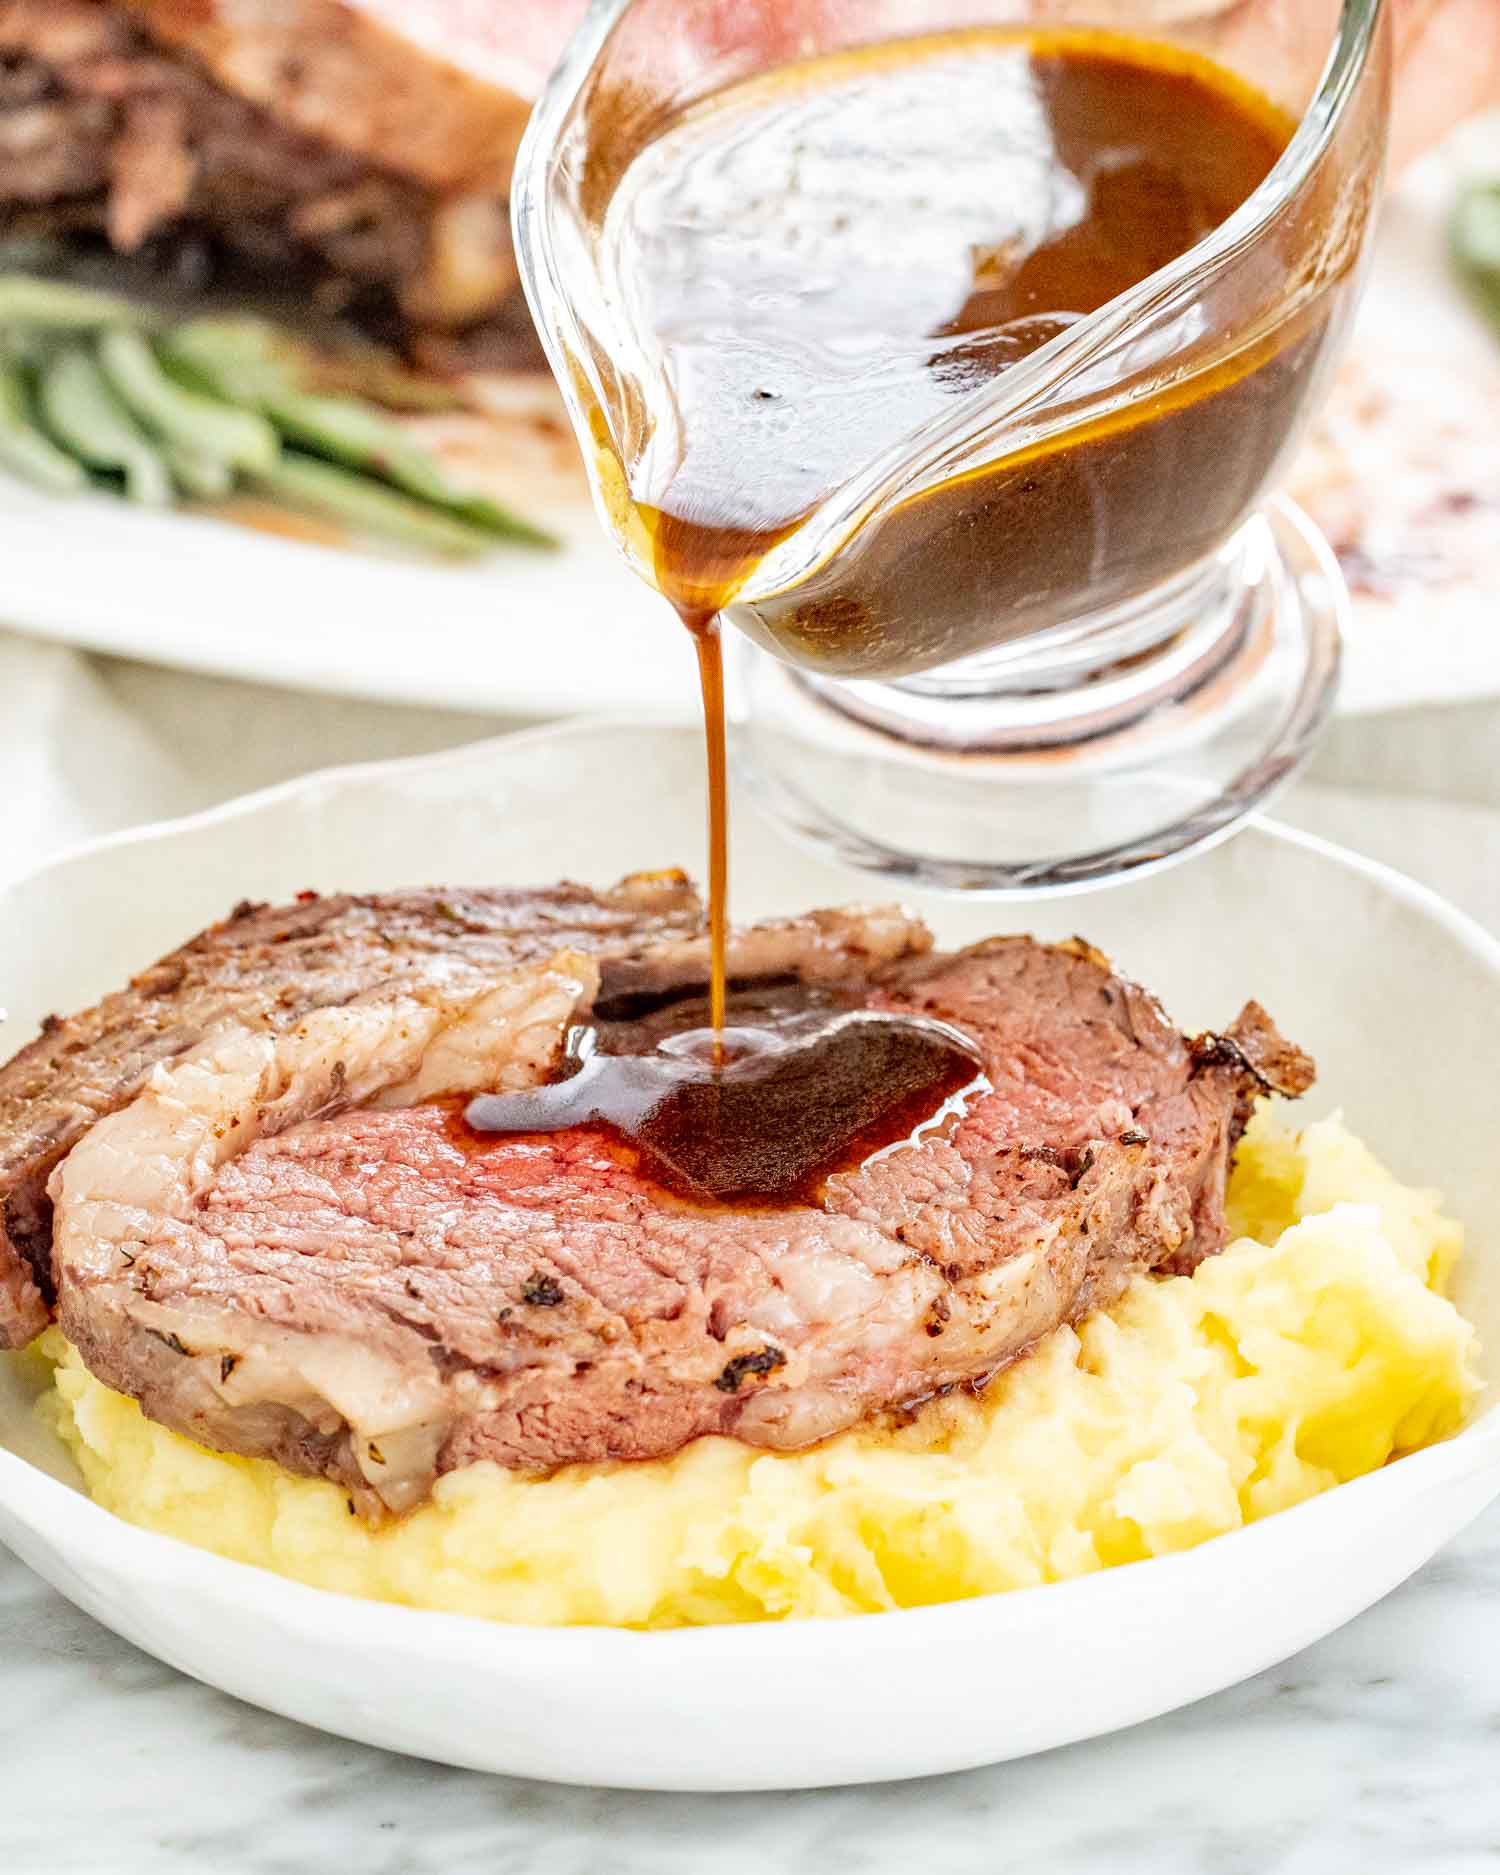 pouring gravy on a piece of prime rib roast that sits atop a bed of mashed potatoes.